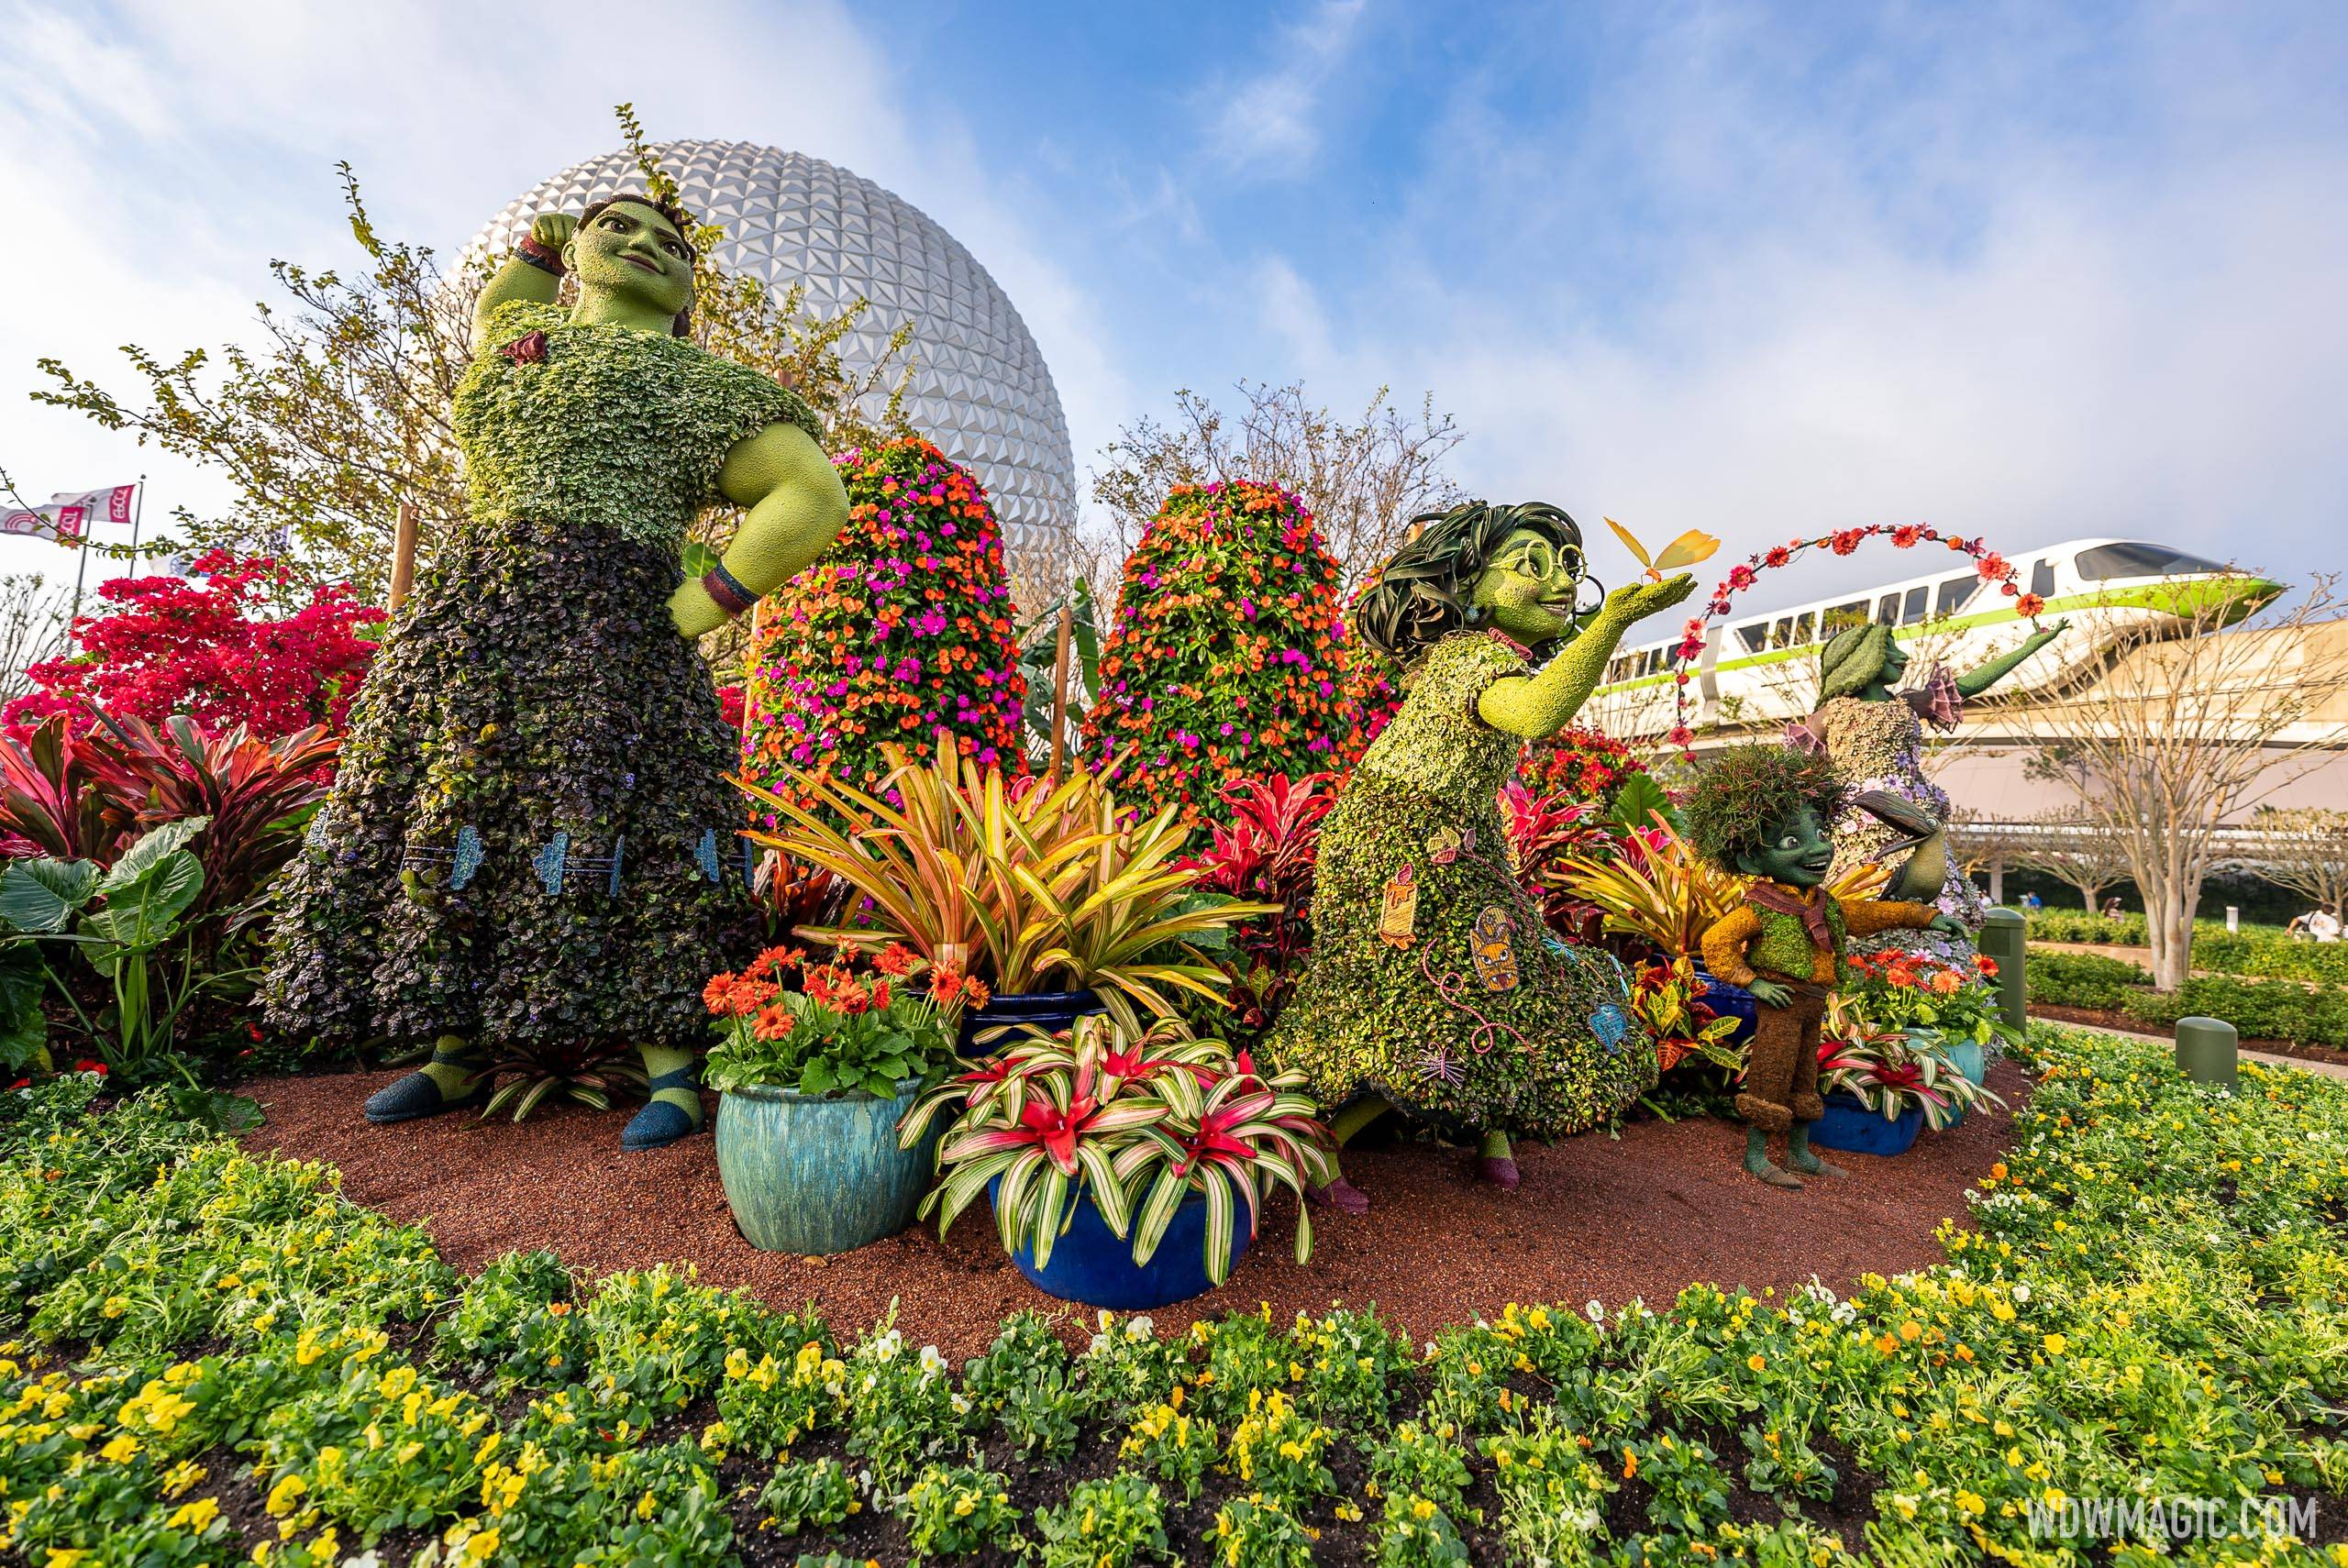 Bonus Park Pass reservations are available at EPCOT March 2 through March 10